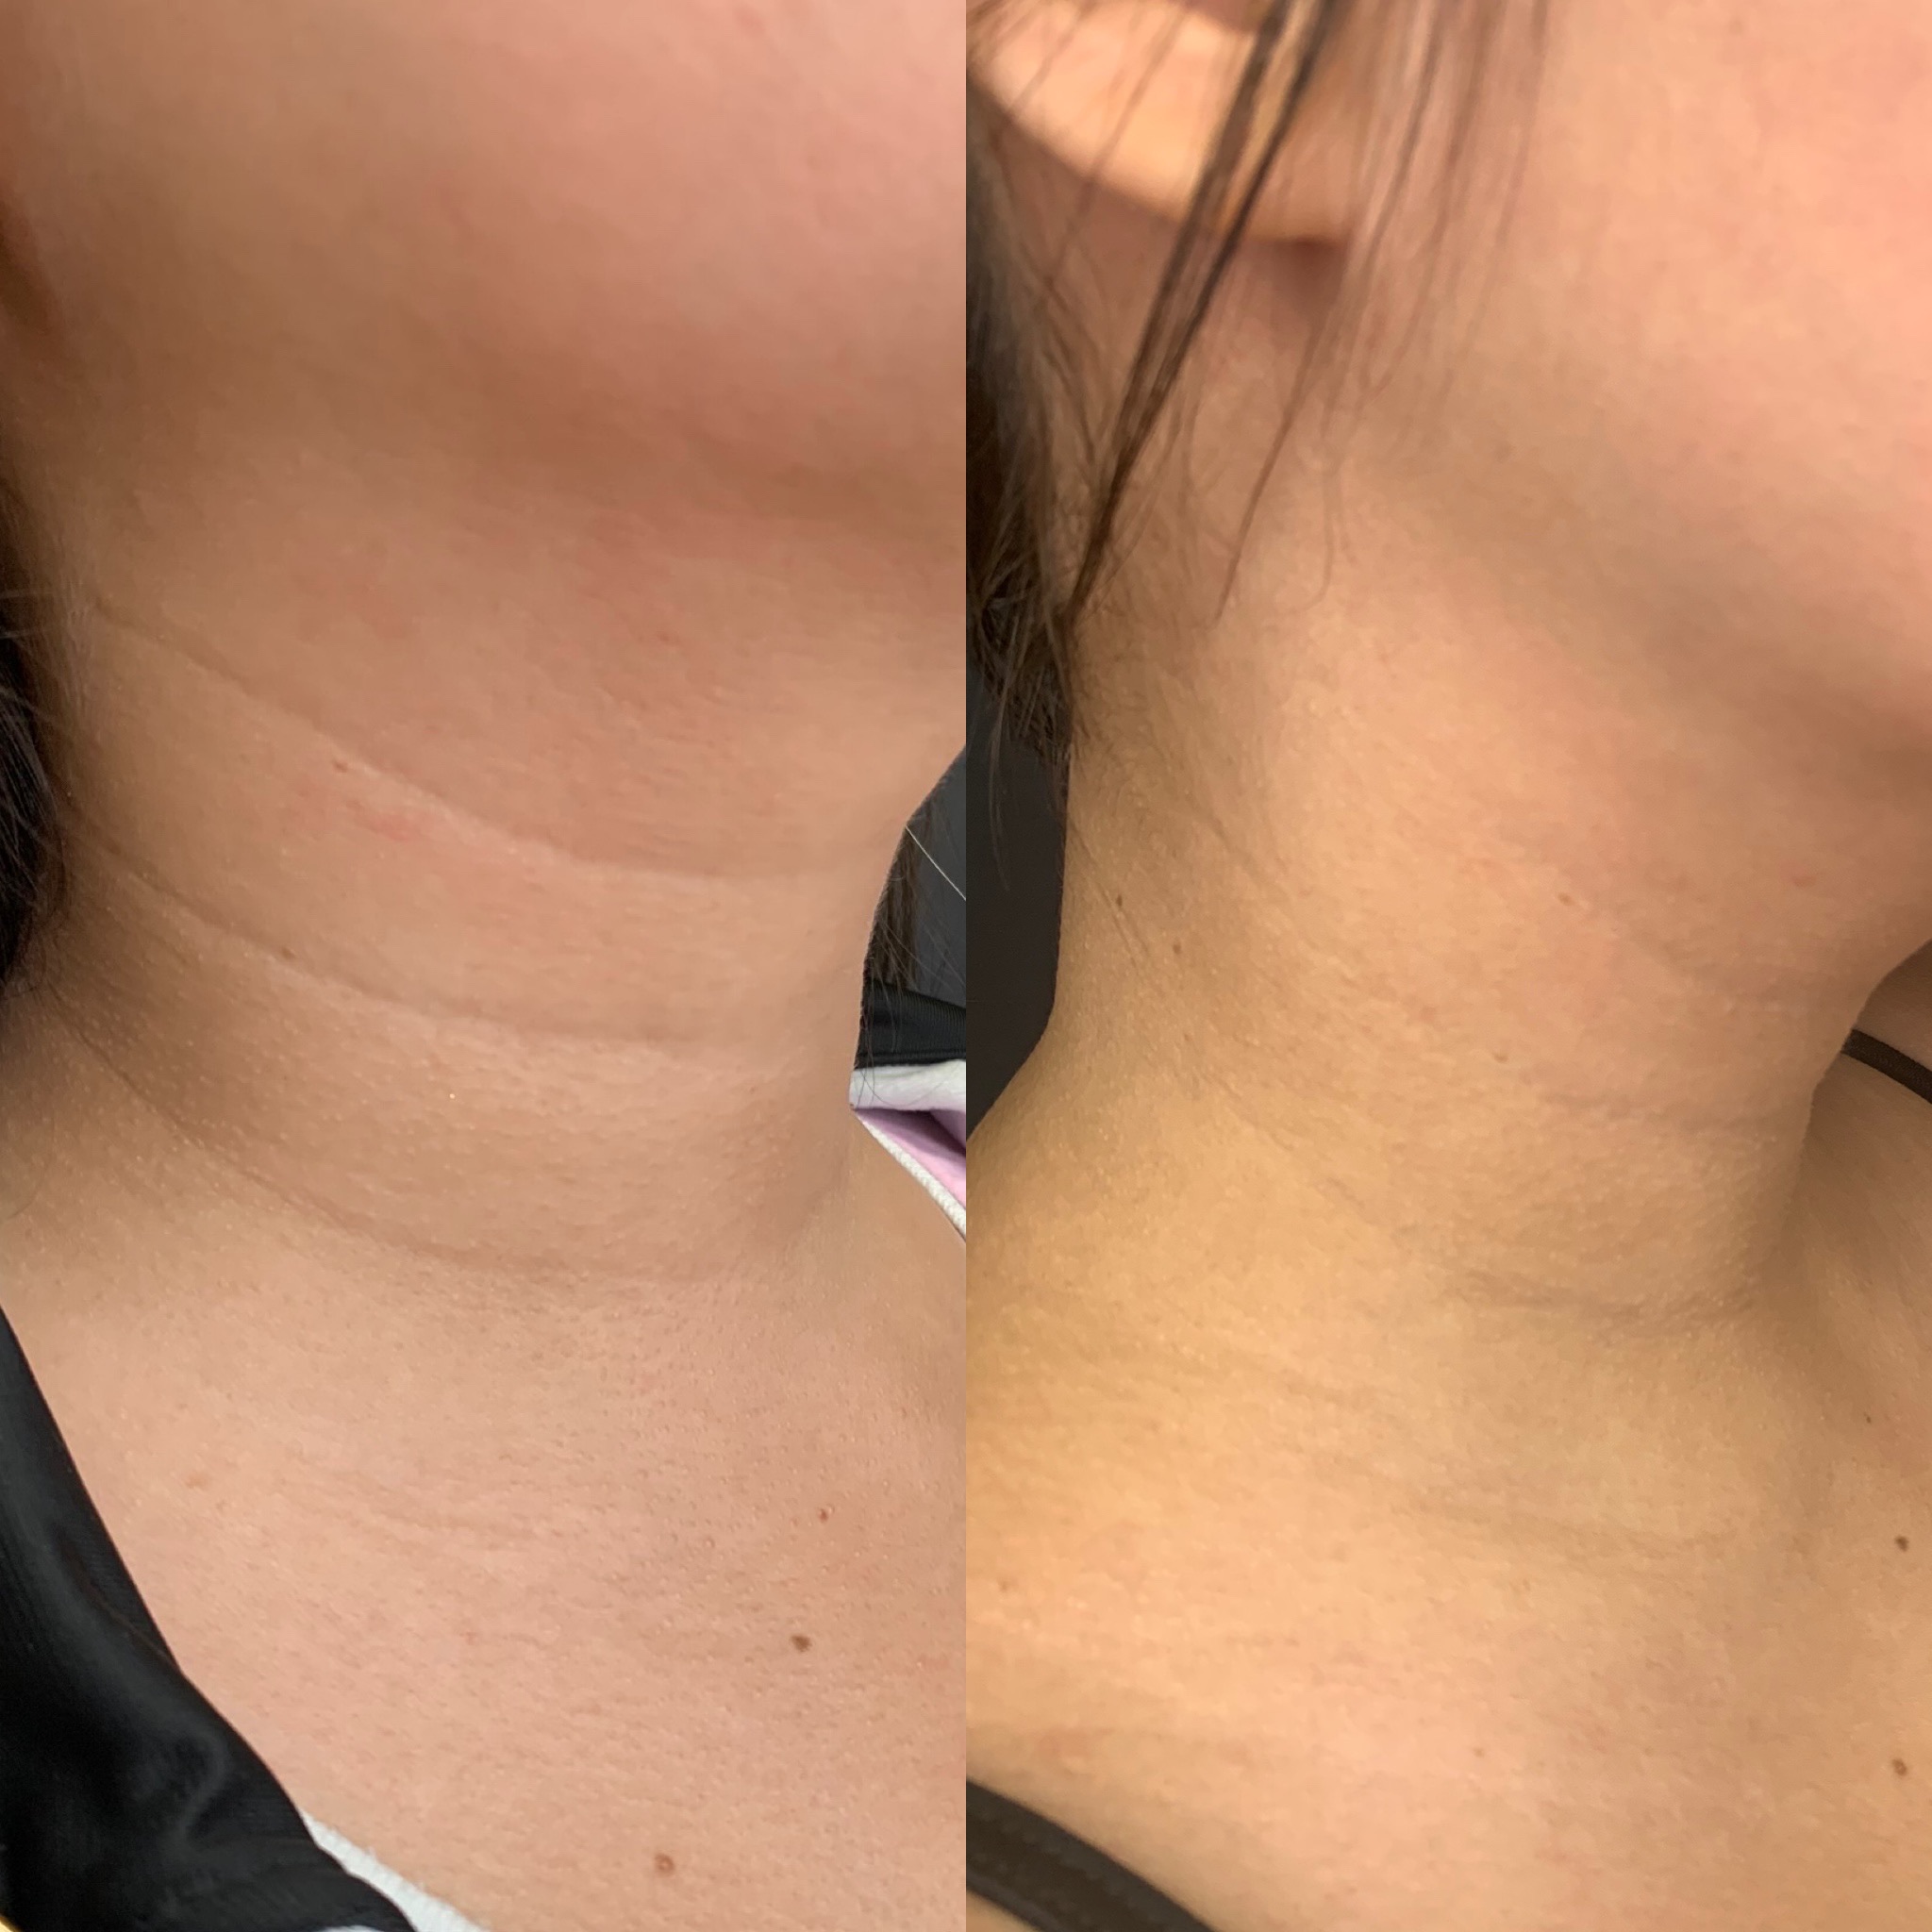 Before and After Necklines Treatment | Beauty Boost Med Spa in Newport Beach, CA